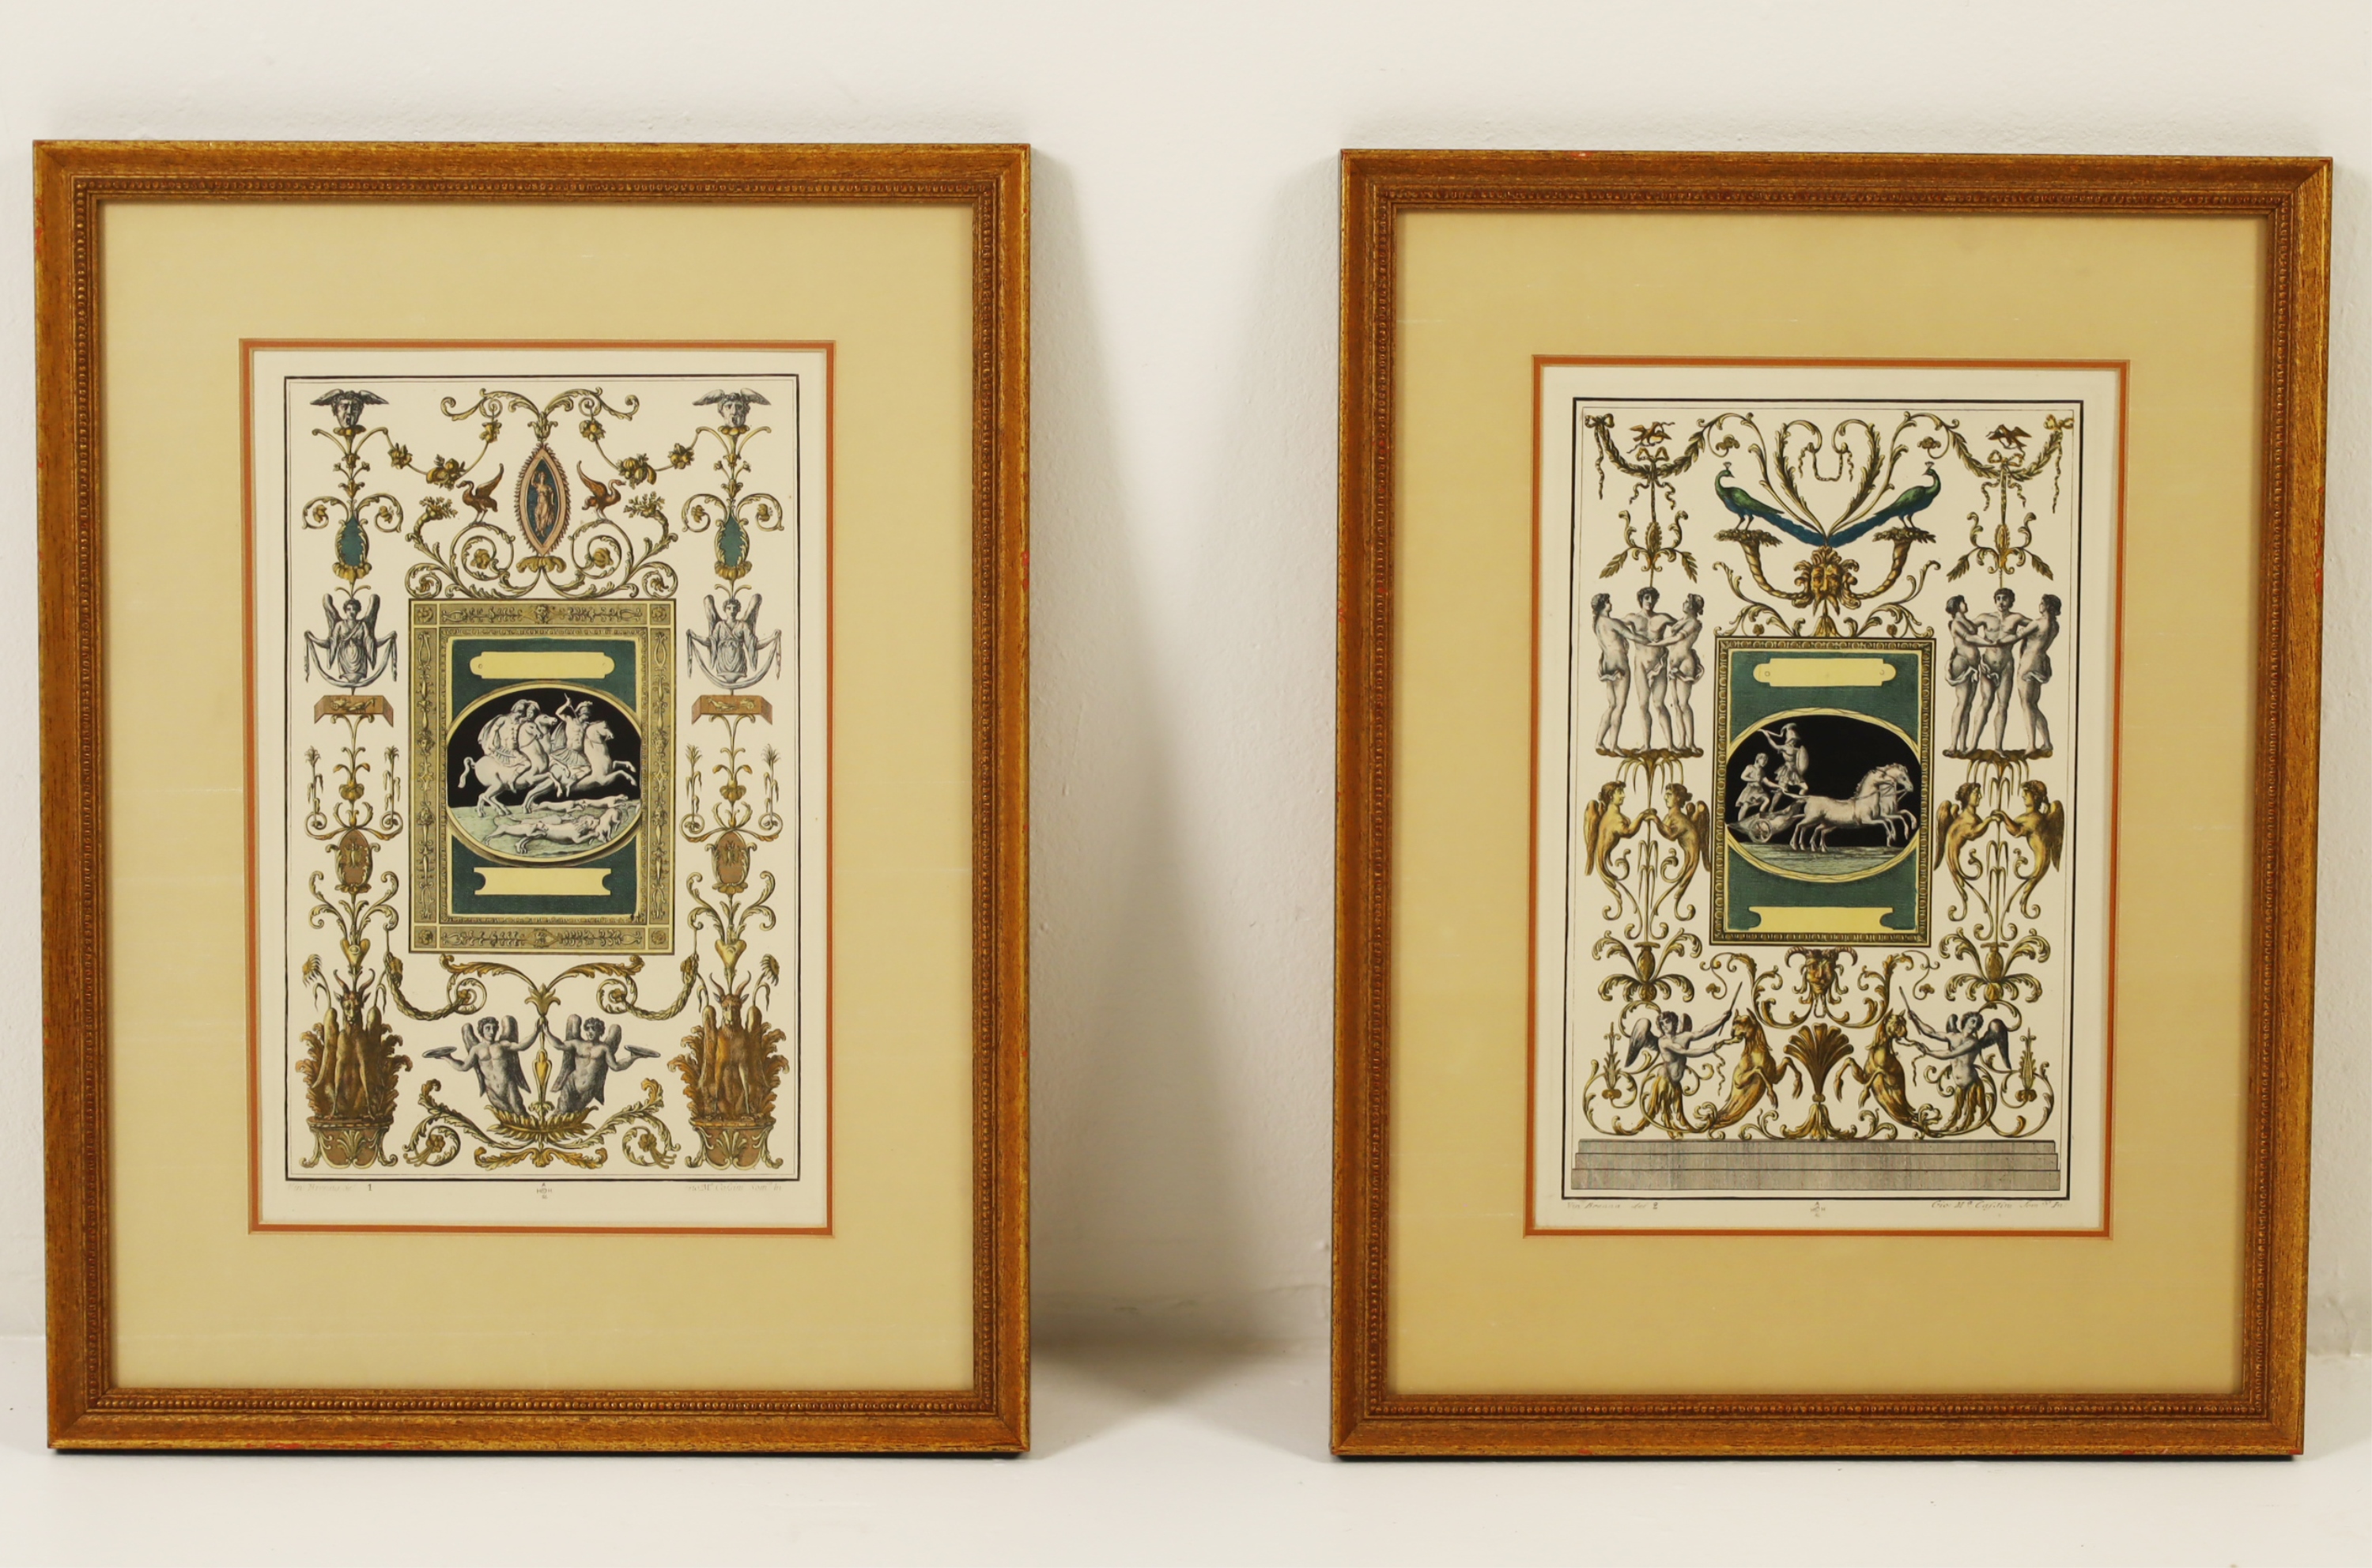 PAIR OF NEO-CLASSICAL COLORED PLATES